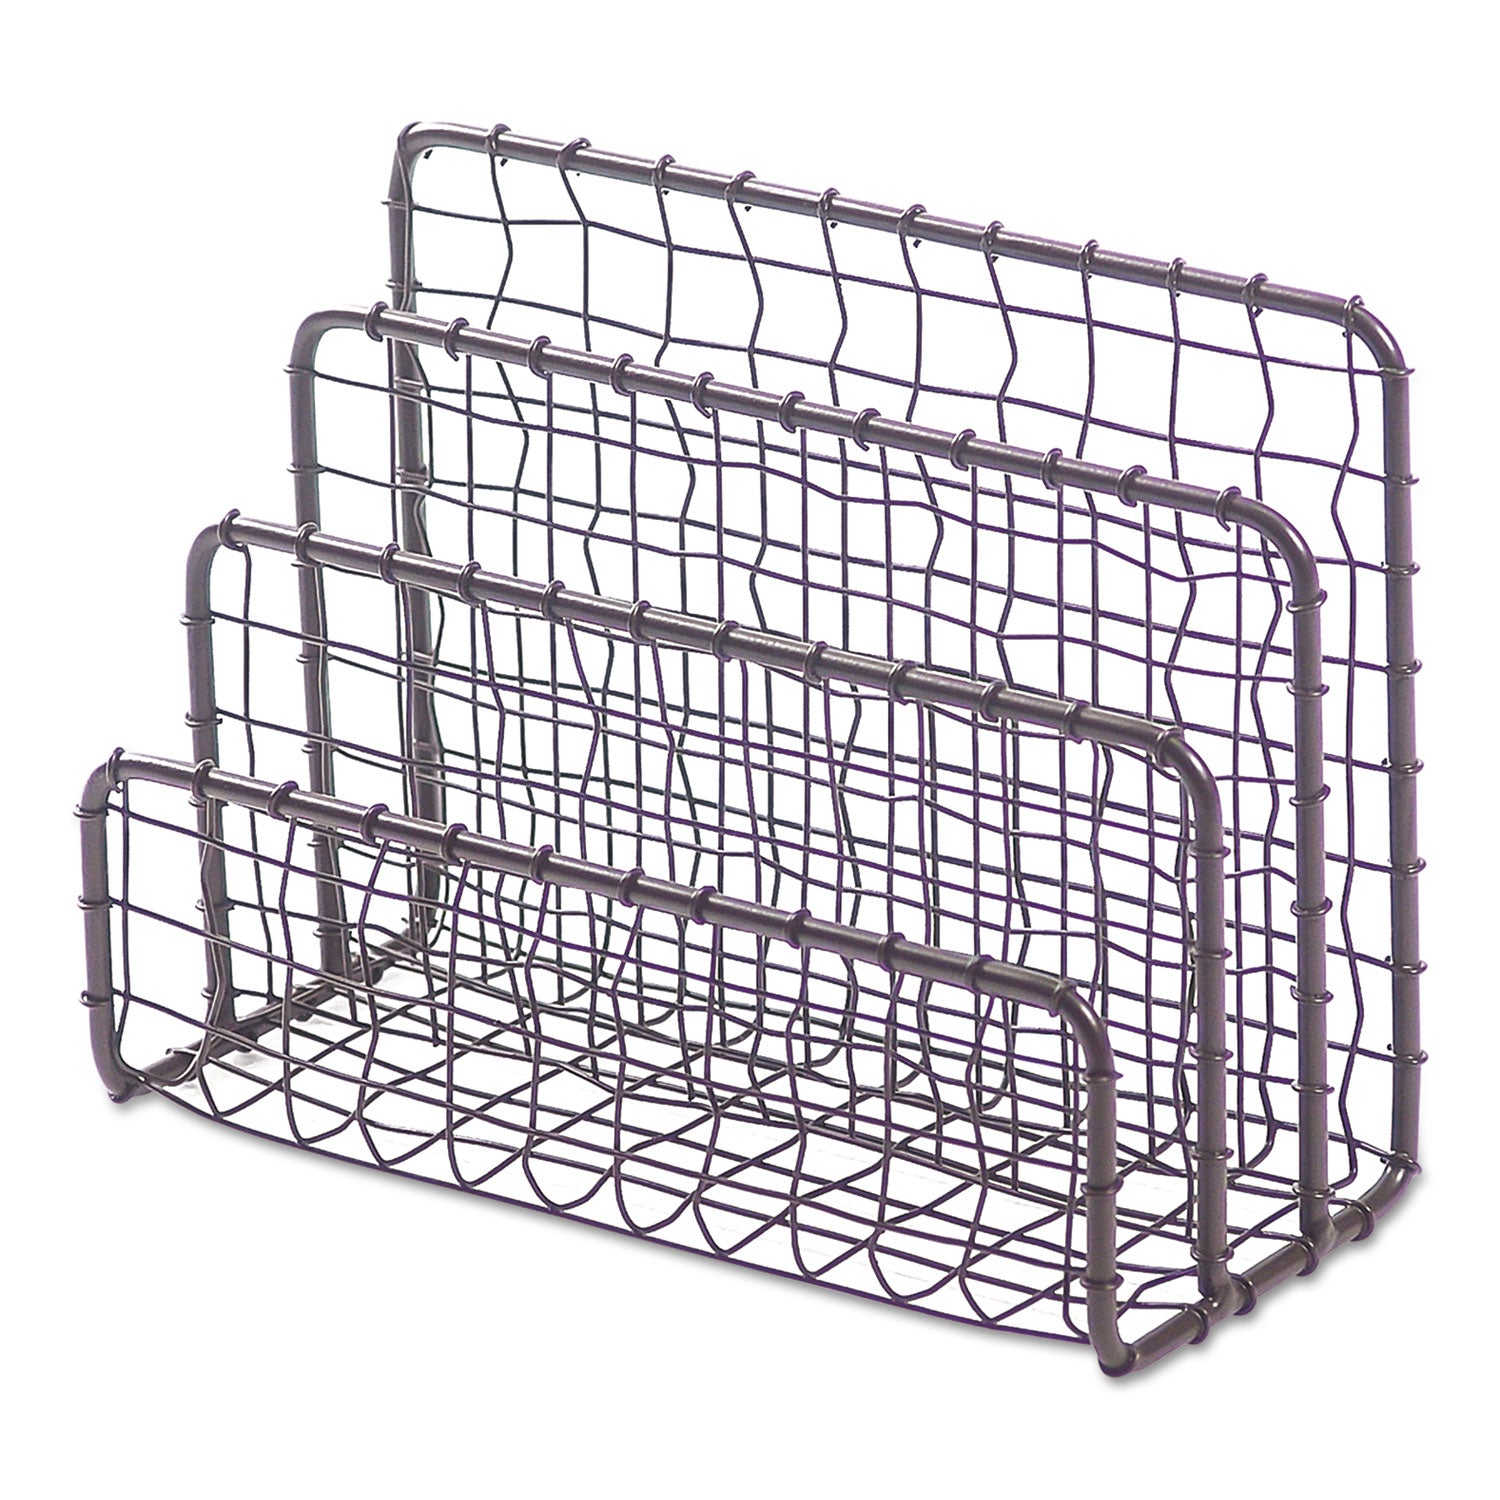 vintage-wire-mesh-file-and-letter-sorter-3-sections-dl-to-legal-size-files-663-x-288-x-513-vintage-bronze_unv20062 - 1